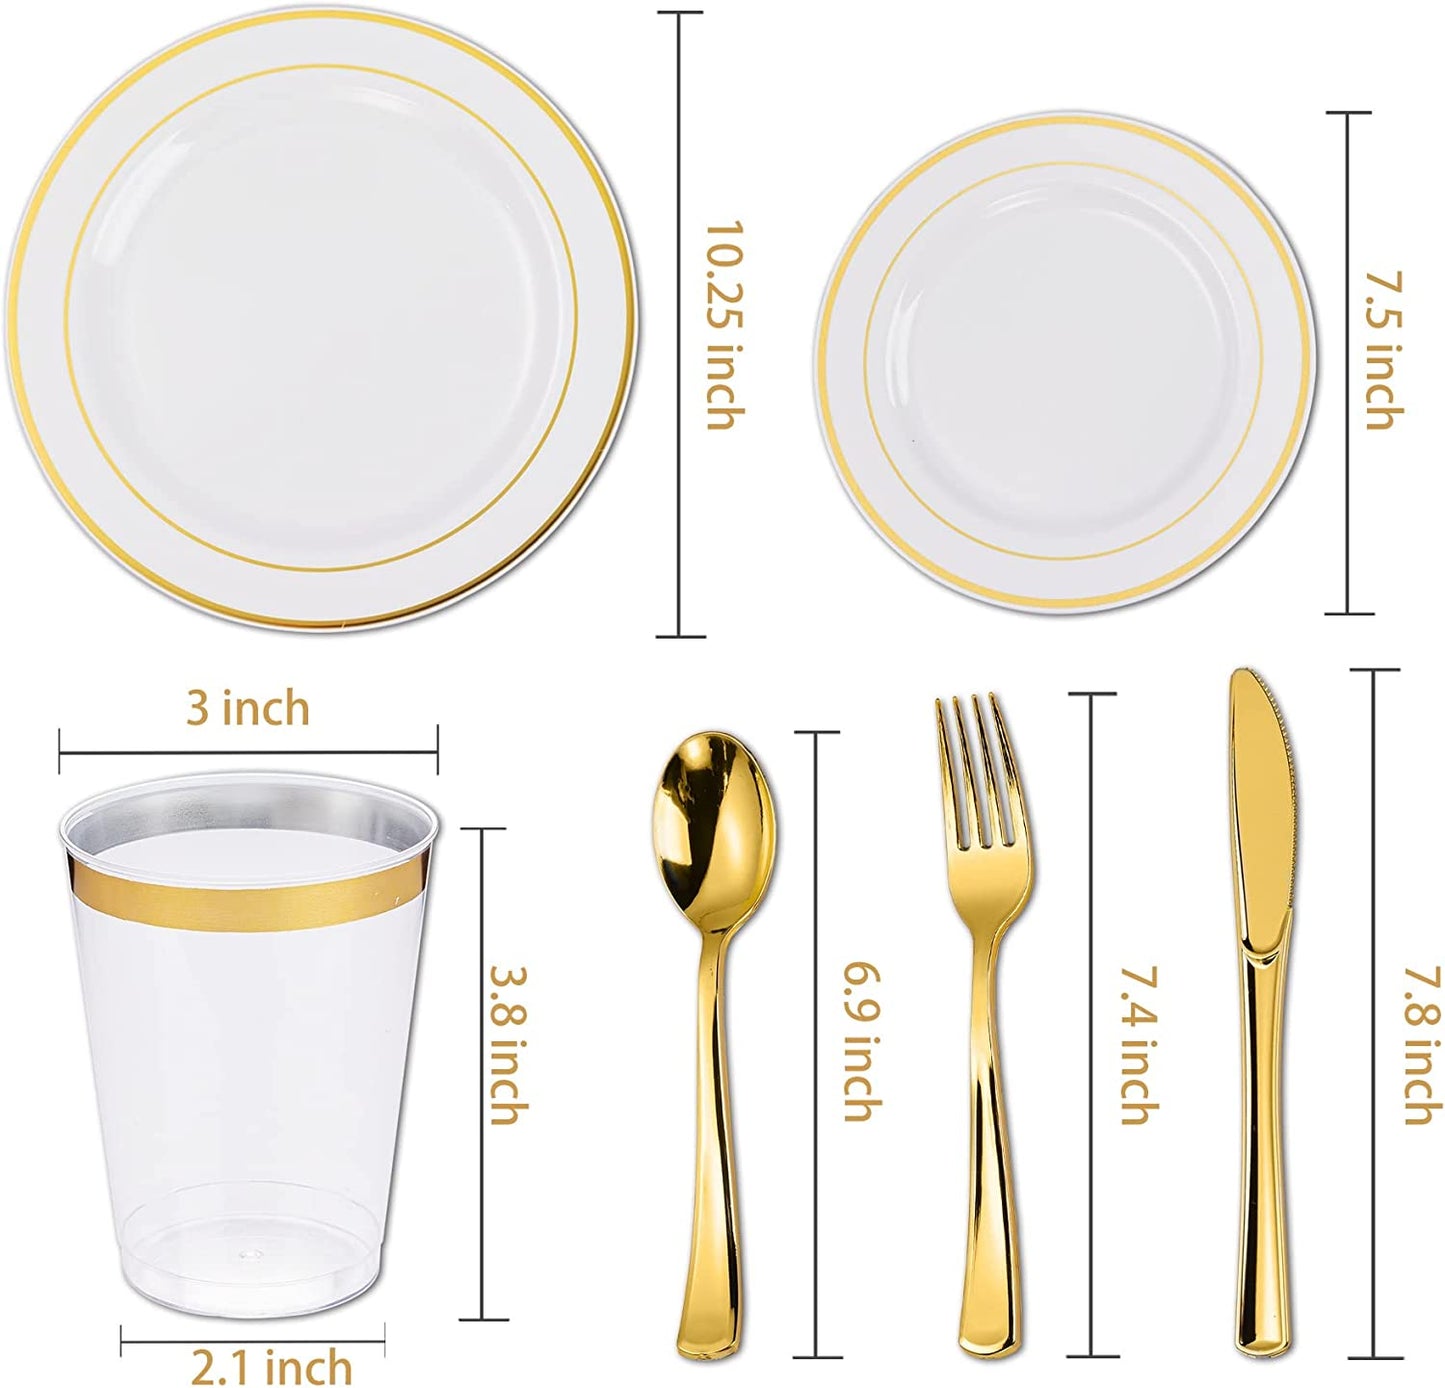 N9R 150PCS Gold Plastic Plates with Plastic Cutlery Set and Cups, Disposable Silverware include 25 Dinner Plates, 25 Dessert Plates, 25 Forks, 25 Knives, 25 Spoons, 25 Cups for Party and Wedding